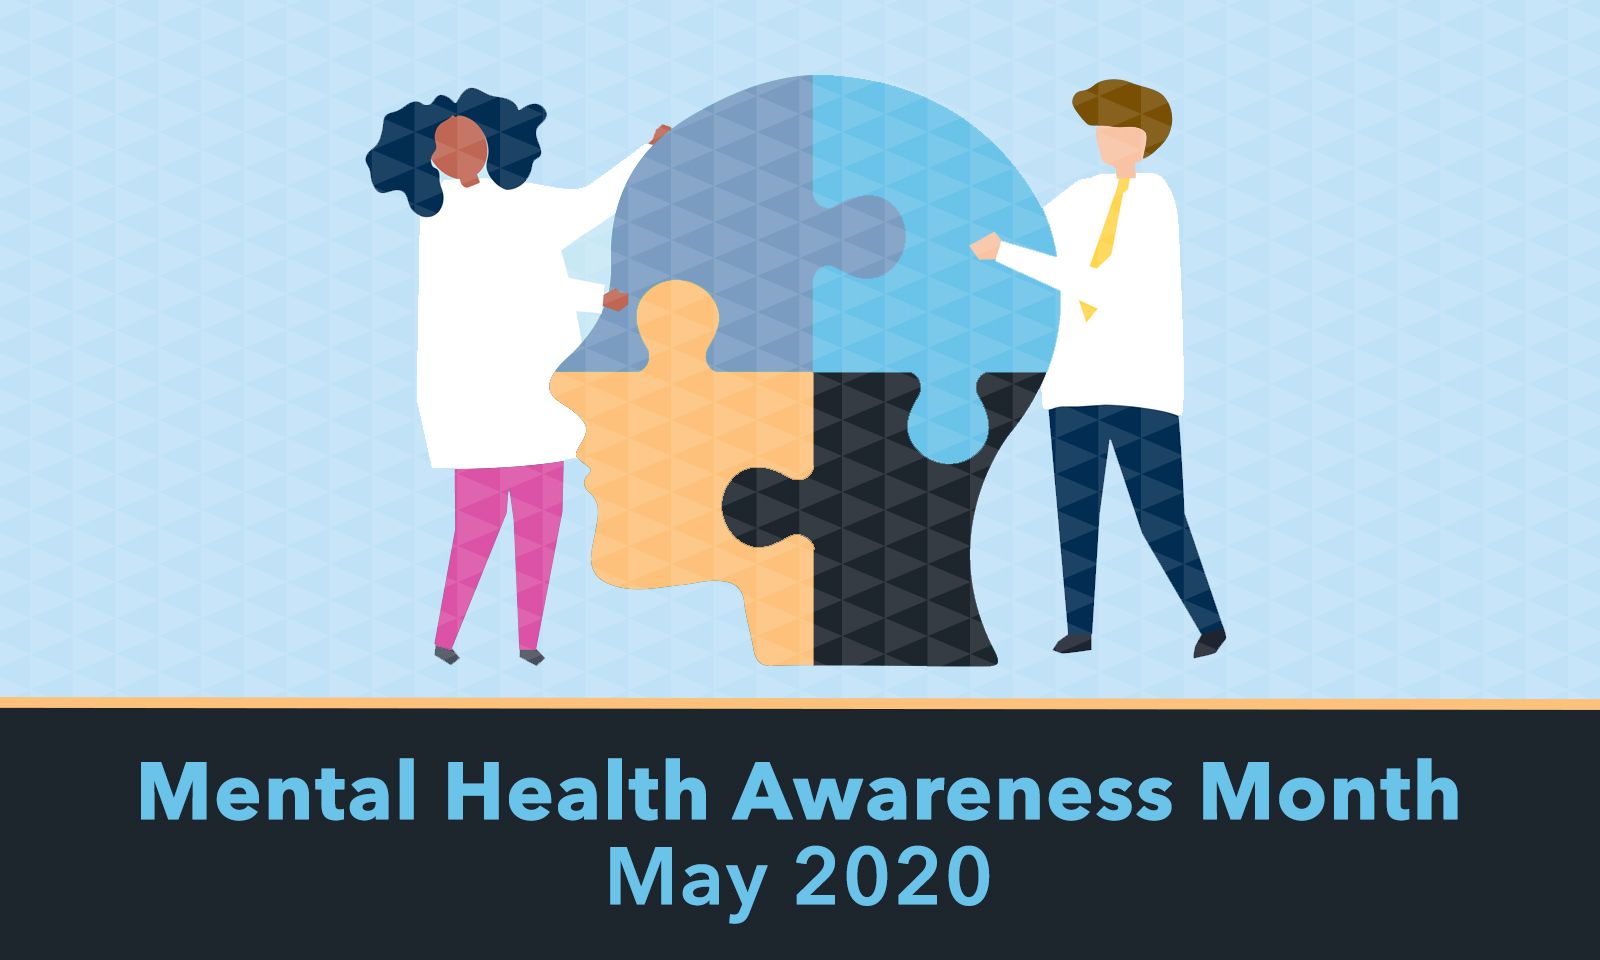 May 2020 Mental Health Awareness Month Resources